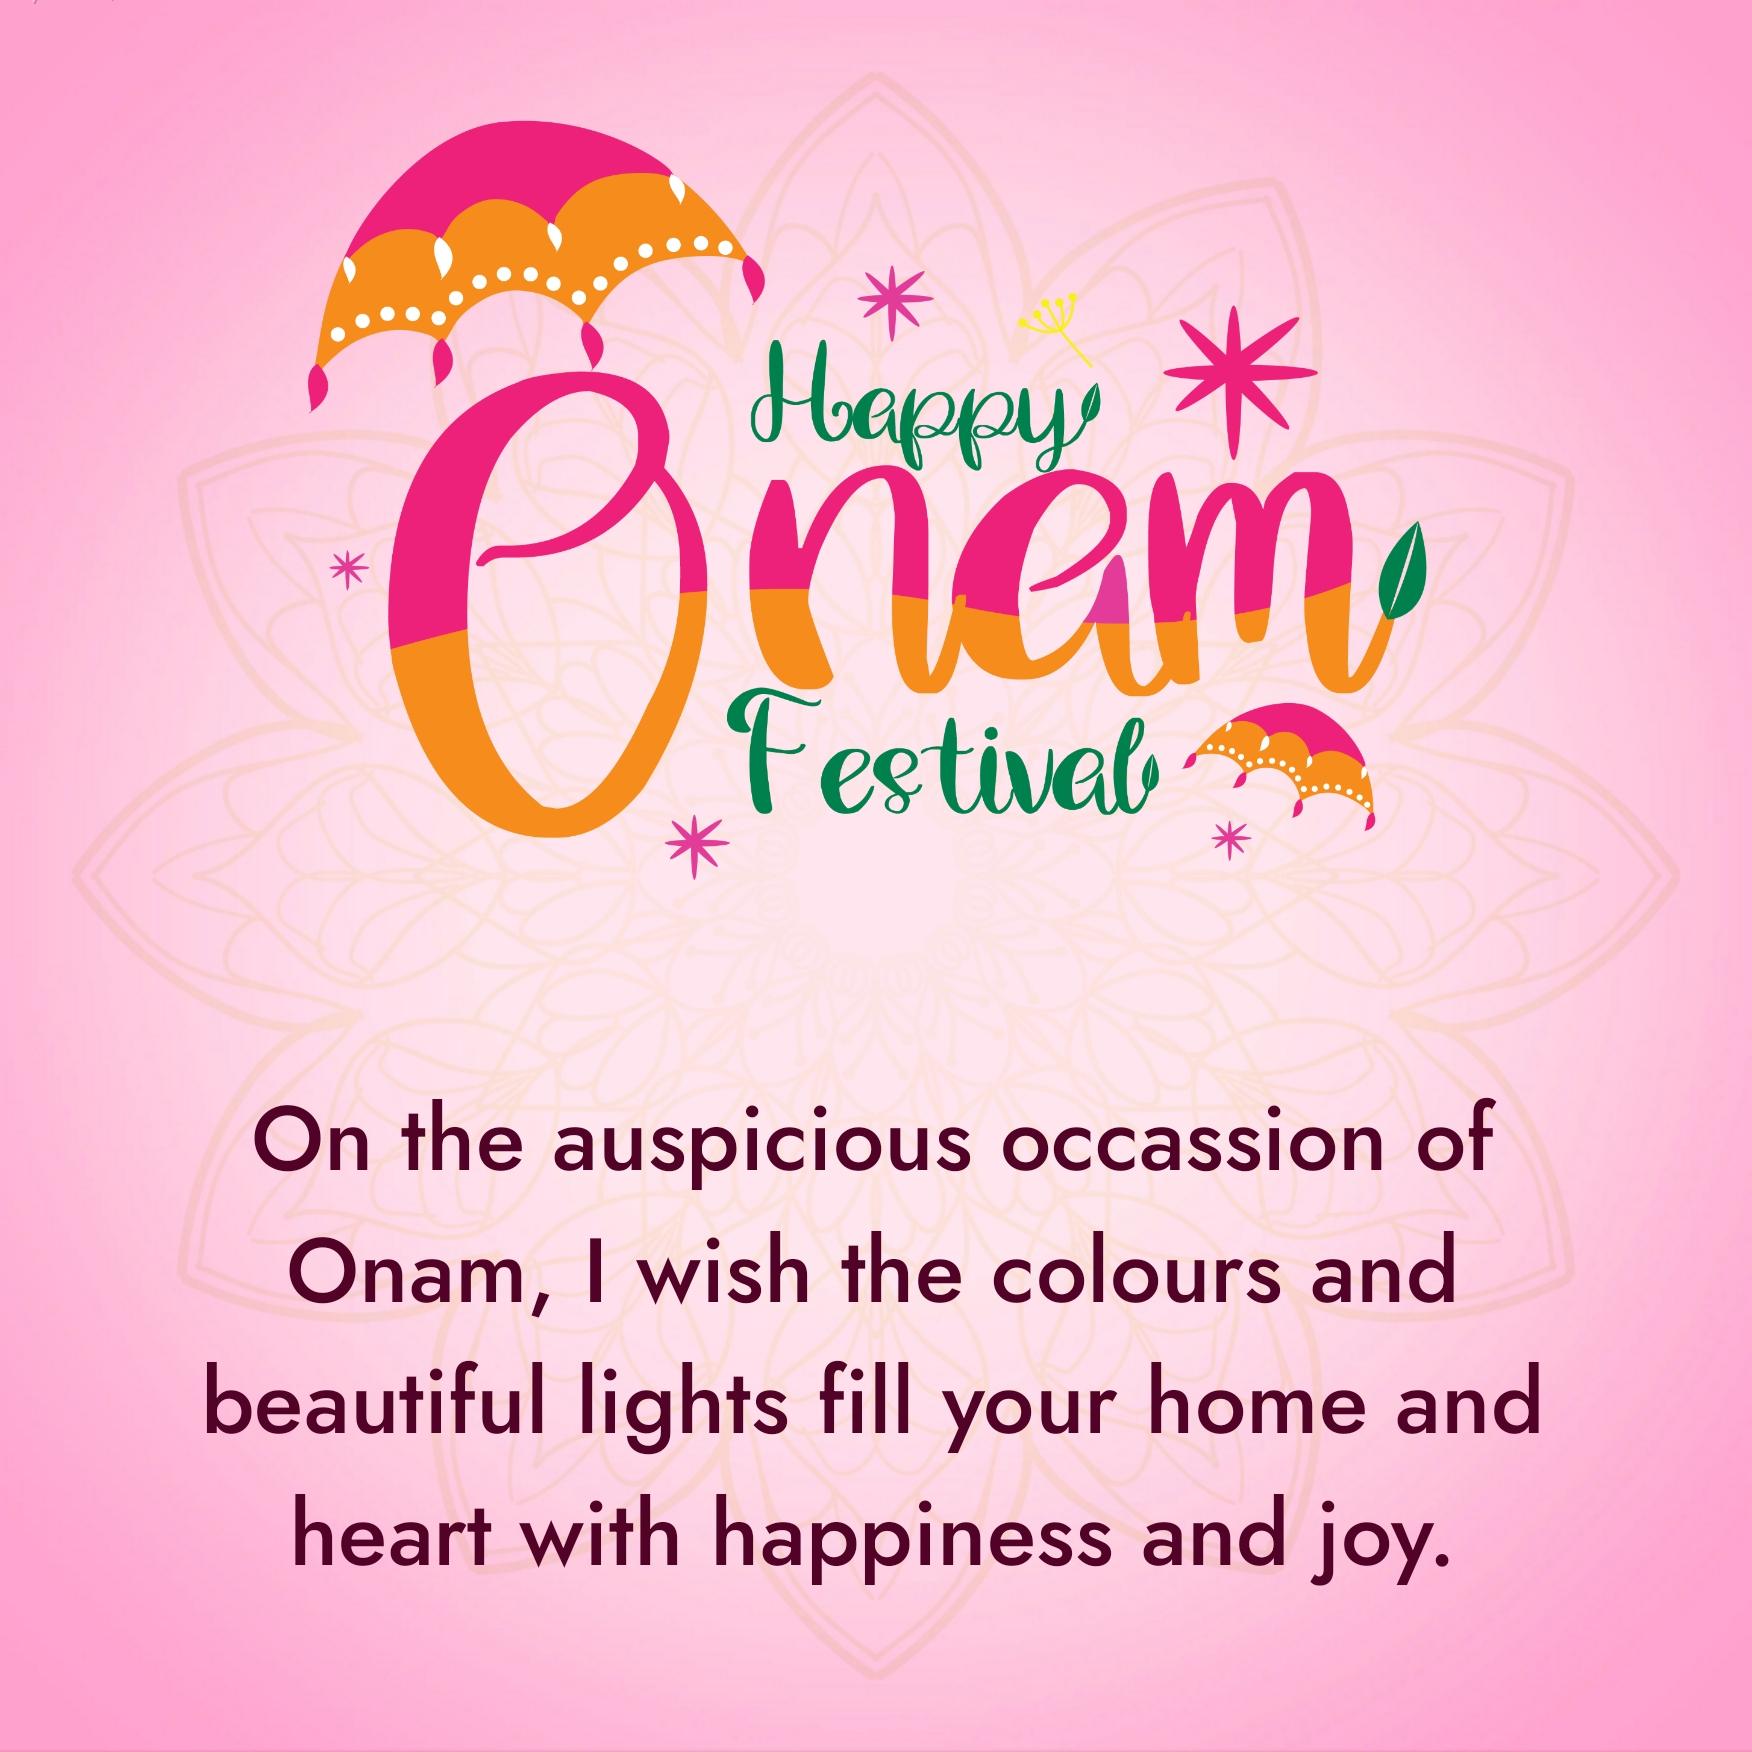 On the auspicious occassion of Onam I wish the colours